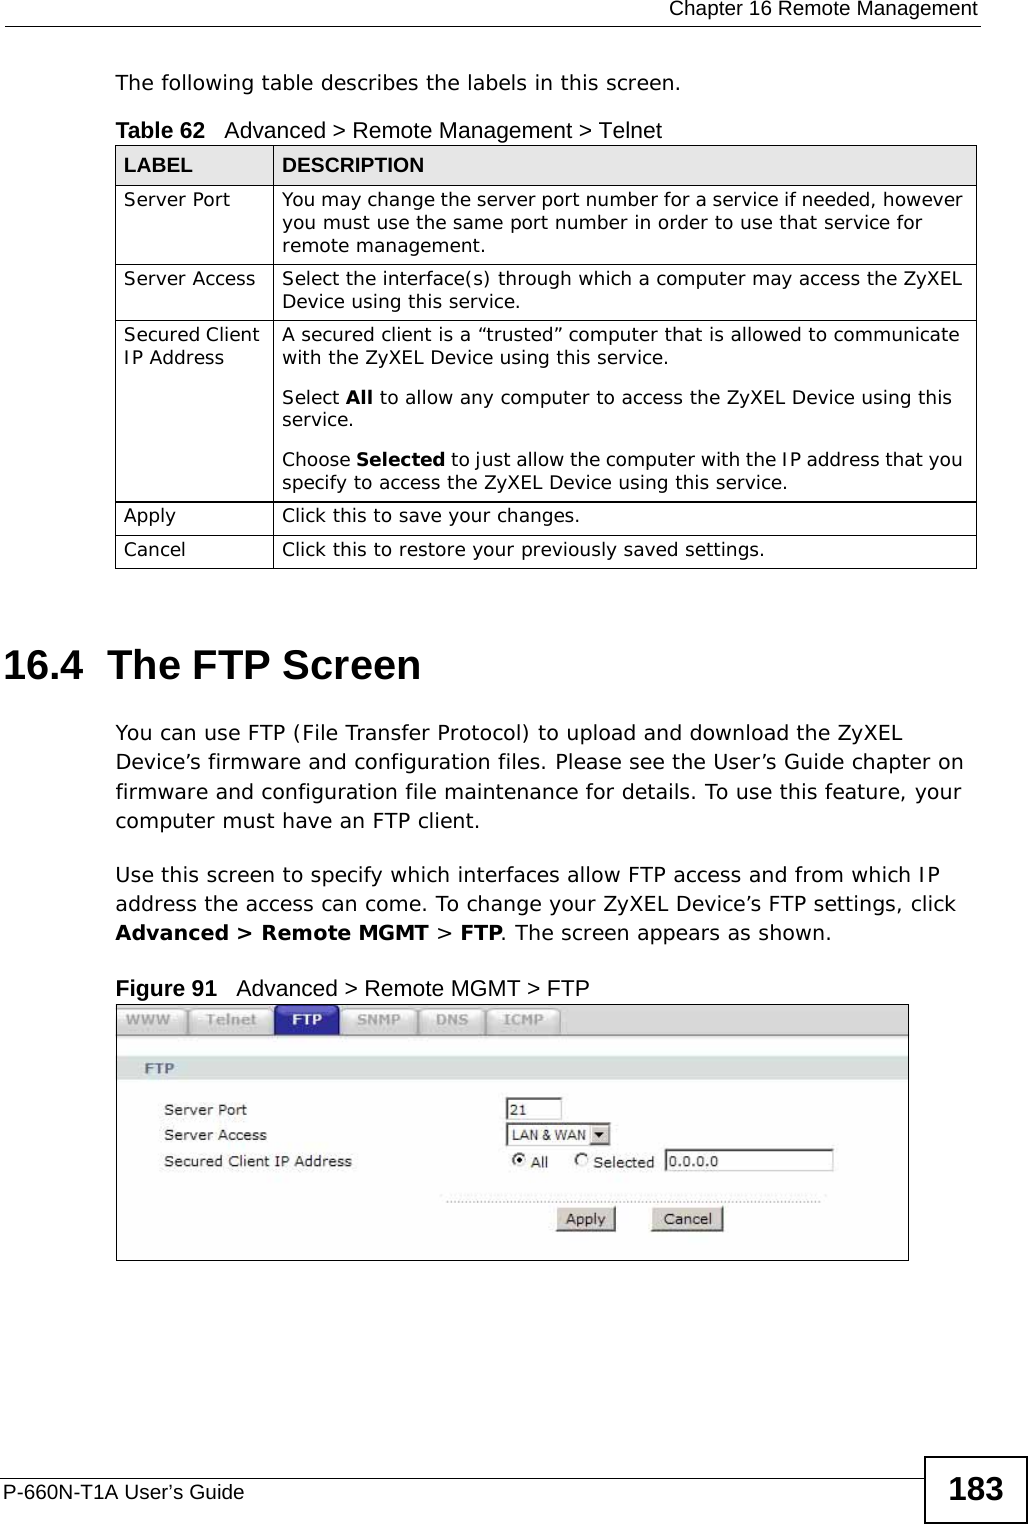  Chapter 16 Remote ManagementP-660N-T1A User’s Guide 183The following table describes the labels in this screen.16.4  The FTP Screen You can use FTP (File Transfer Protocol) to upload and download the ZyXEL Device’s firmware and configuration files. Please see the User’s Guide chapter on firmware and configuration file maintenance for details. To use this feature, your computer must have an FTP client.Use this screen to specify which interfaces allow FTP access and from which IP address the access can come. To change your ZyXEL Device’s FTP settings, click Advanced &gt; Remote MGMT &gt; FTP. The screen appears as shown.Figure 91   Advanced &gt; Remote MGMT &gt; FTPTable 62   Advanced &gt; Remote Management &gt; TelnetLABEL DESCRIPTIONServer Port You may change the server port number for a service if needed, however you must use the same port number in order to use that service for remote management.Server Access Select the interface(s) through which a computer may access the ZyXEL Device using this service.Secured Client IP Address A secured client is a “trusted” computer that is allowed to communicate with the ZyXEL Device using this service. Select All to allow any computer to access the ZyXEL Device using this service.Choose Selected to just allow the computer with the IP address that you specify to access the ZyXEL Device using this service.Apply Click this to save your changes.Cancel Click this to restore your previously saved settings.